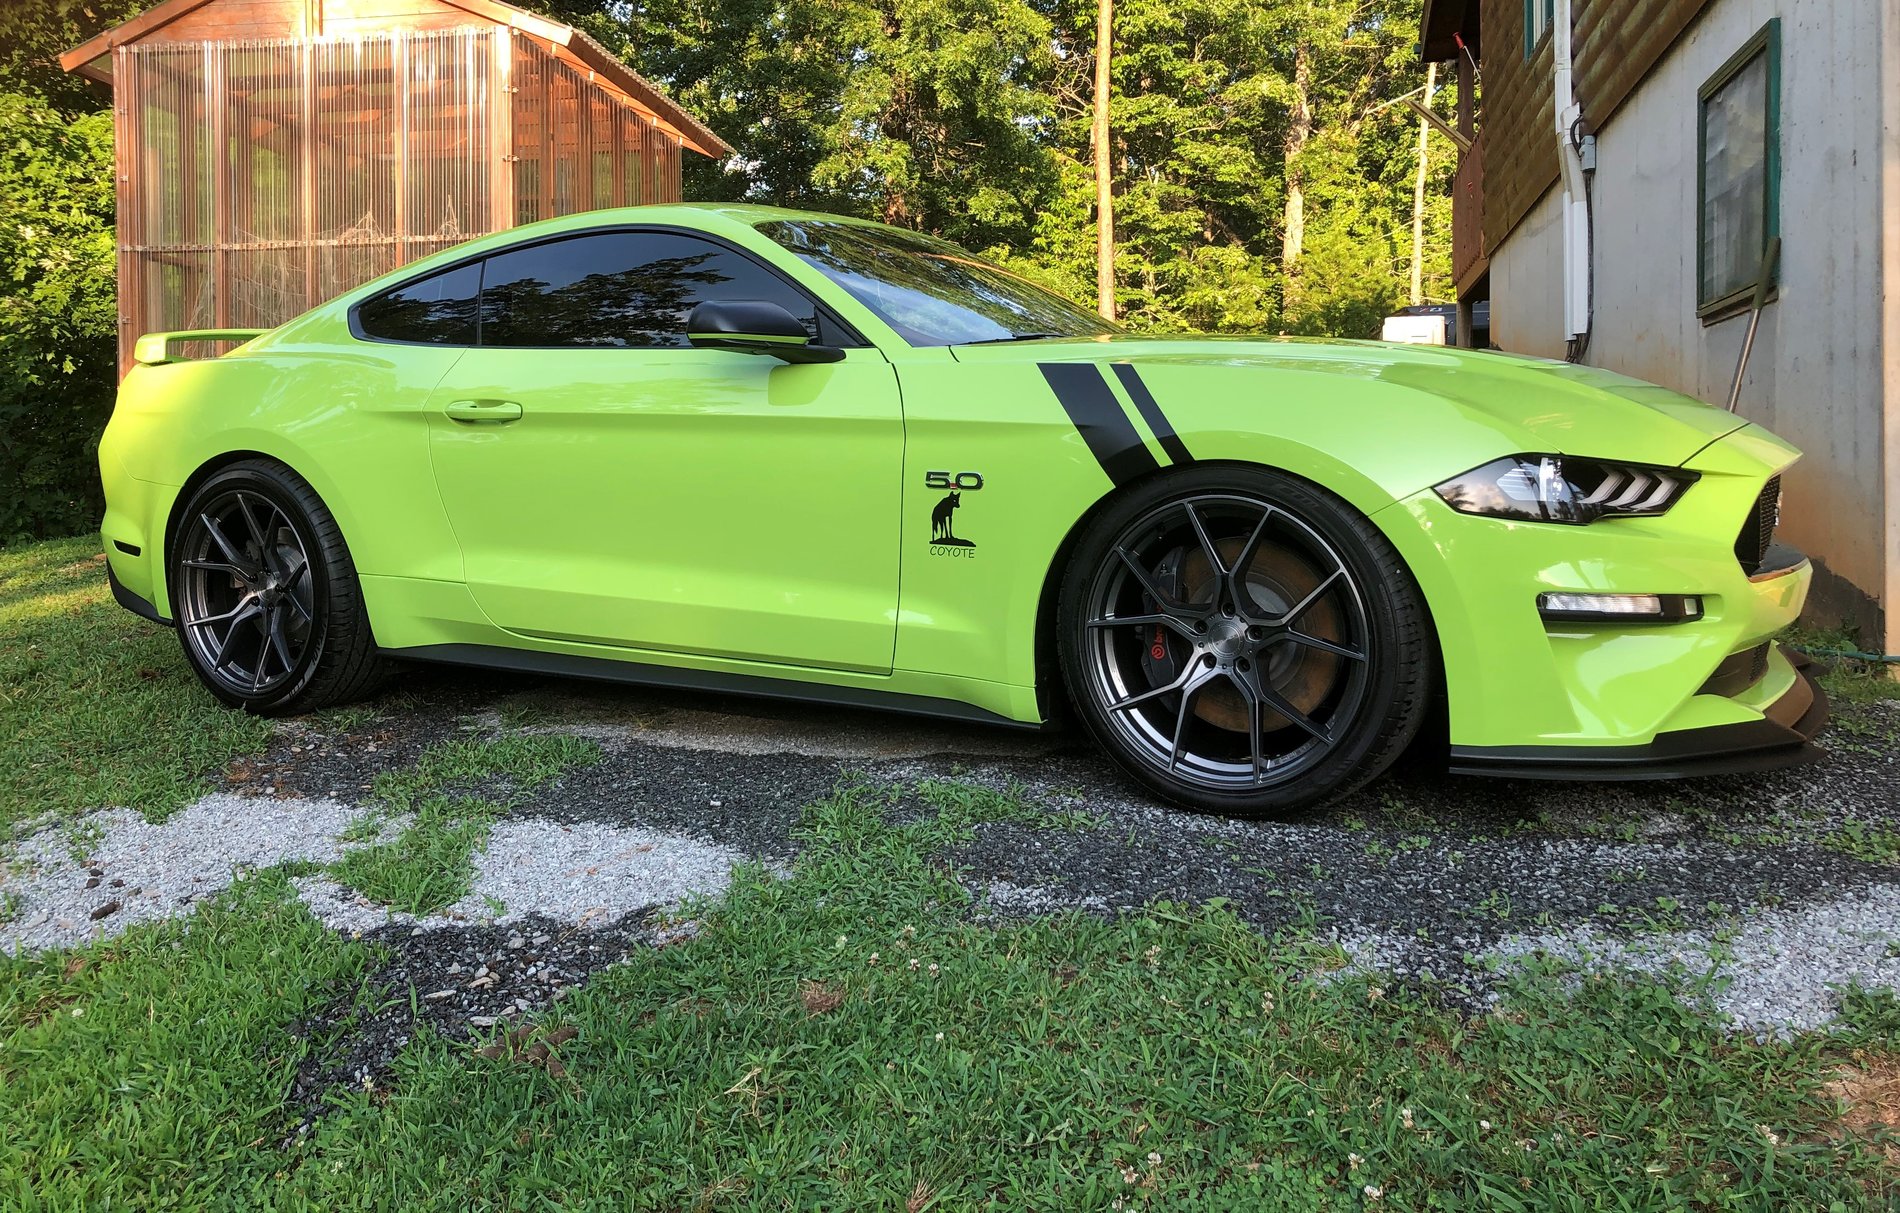 S650 Mustang Authorize Dealer Stance: Rotary Forged SF Series Wheels For Mustang S650 Mustang-with-steeda-springs 3